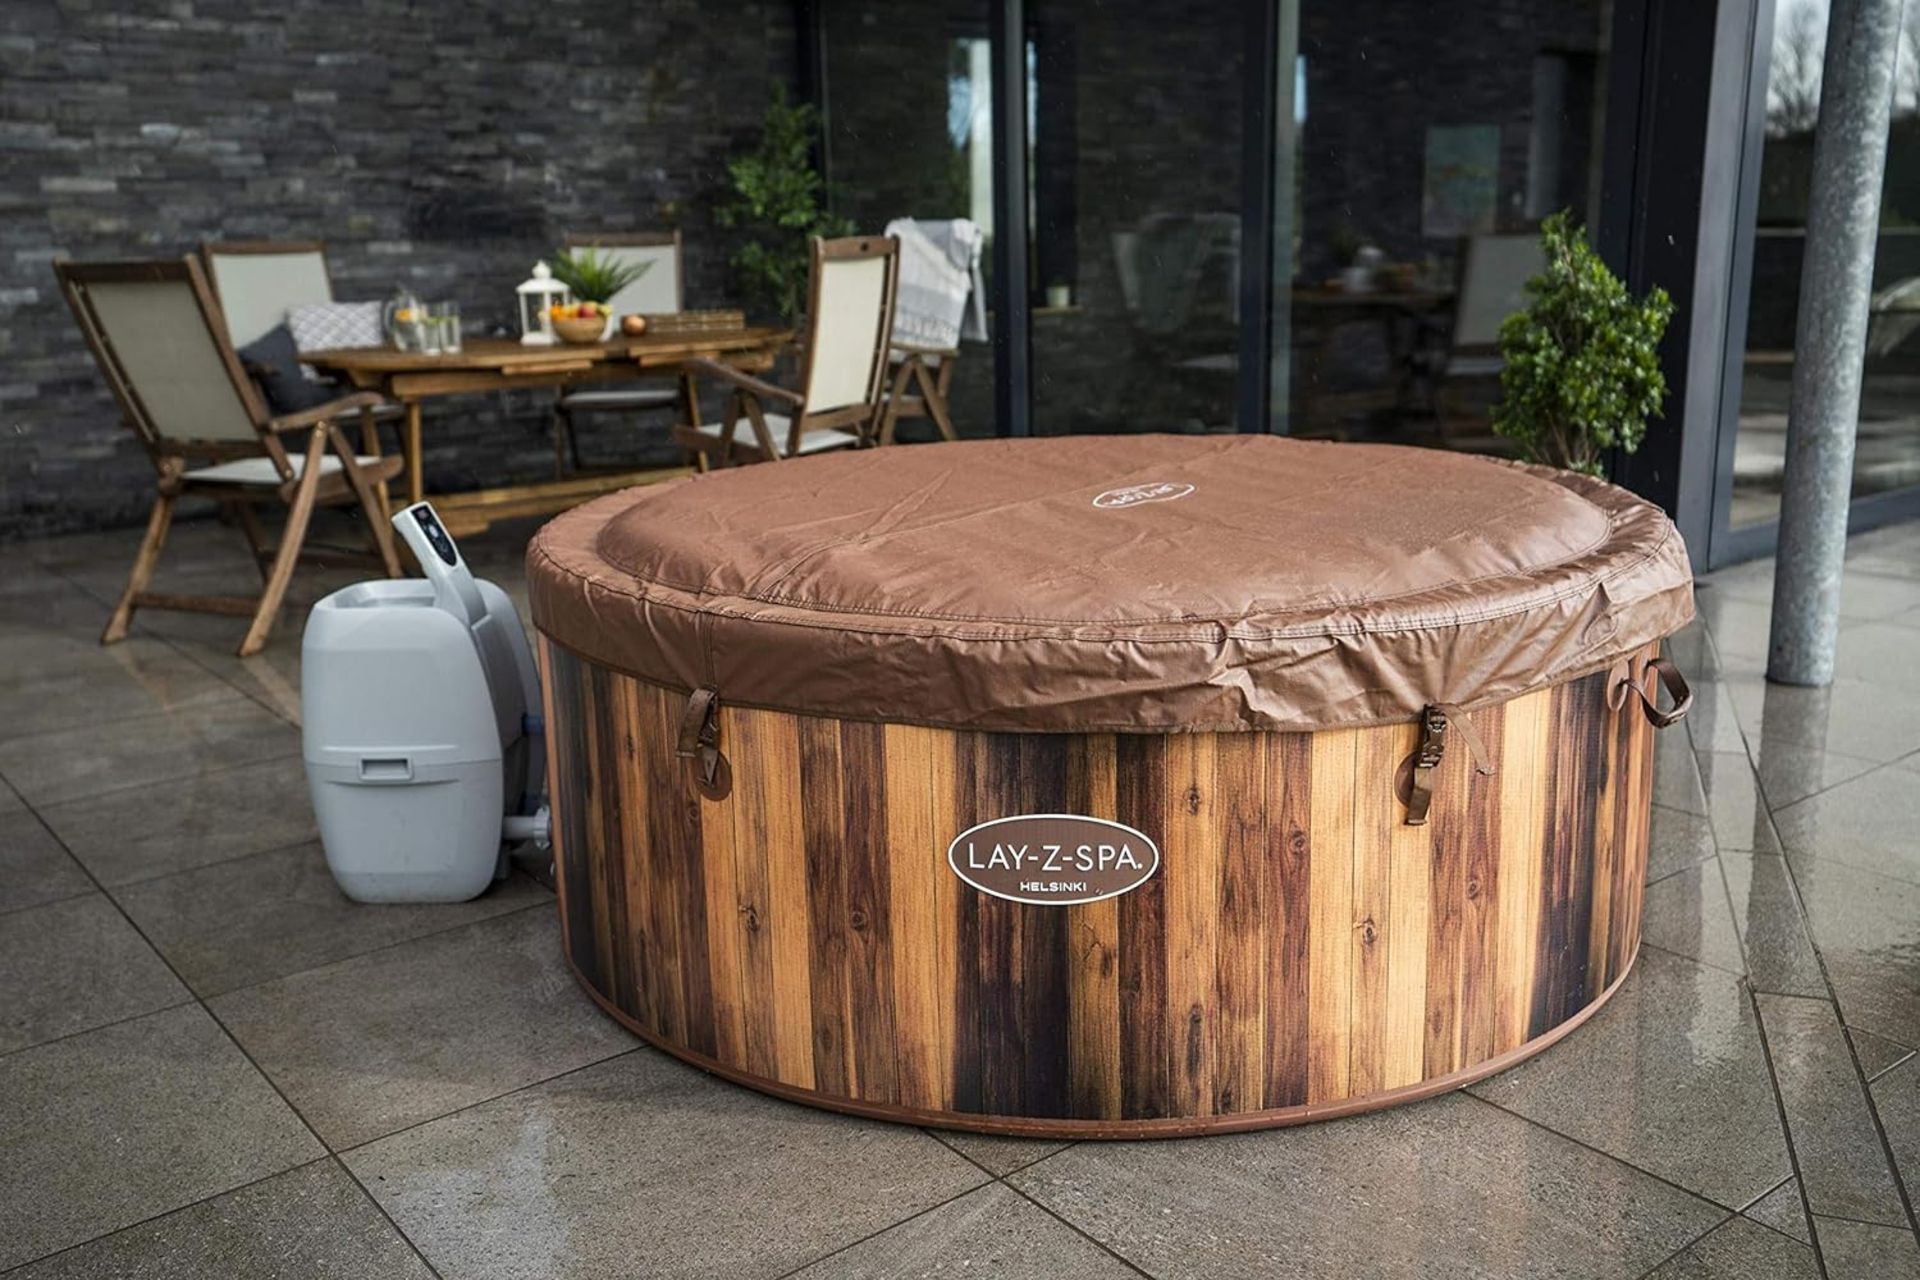 NEW & BOXED LAY-Z-SPA Helsinki 7 Person Hot Tub. RRP £919.99. This Nordic inspired spa features - Image 9 of 9